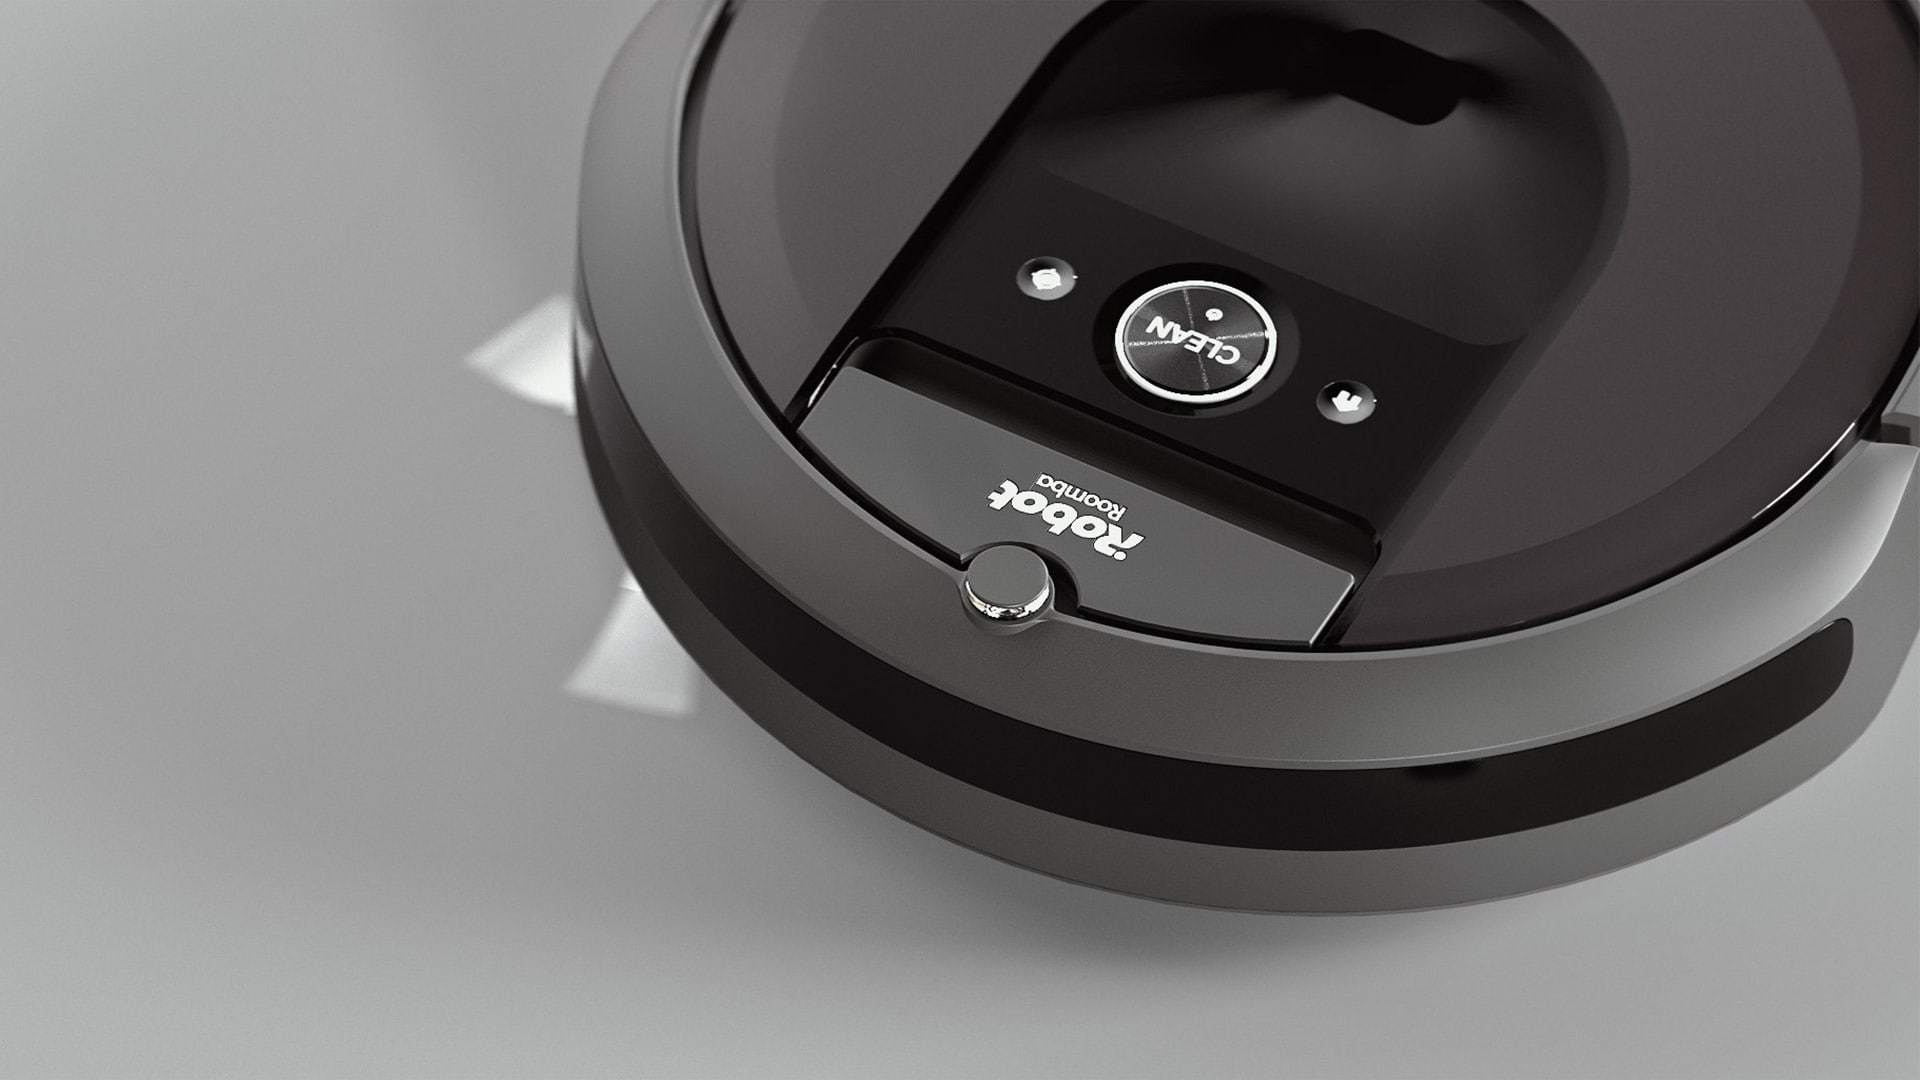 A photorealistic 3D render of a robot vacuum for a product video